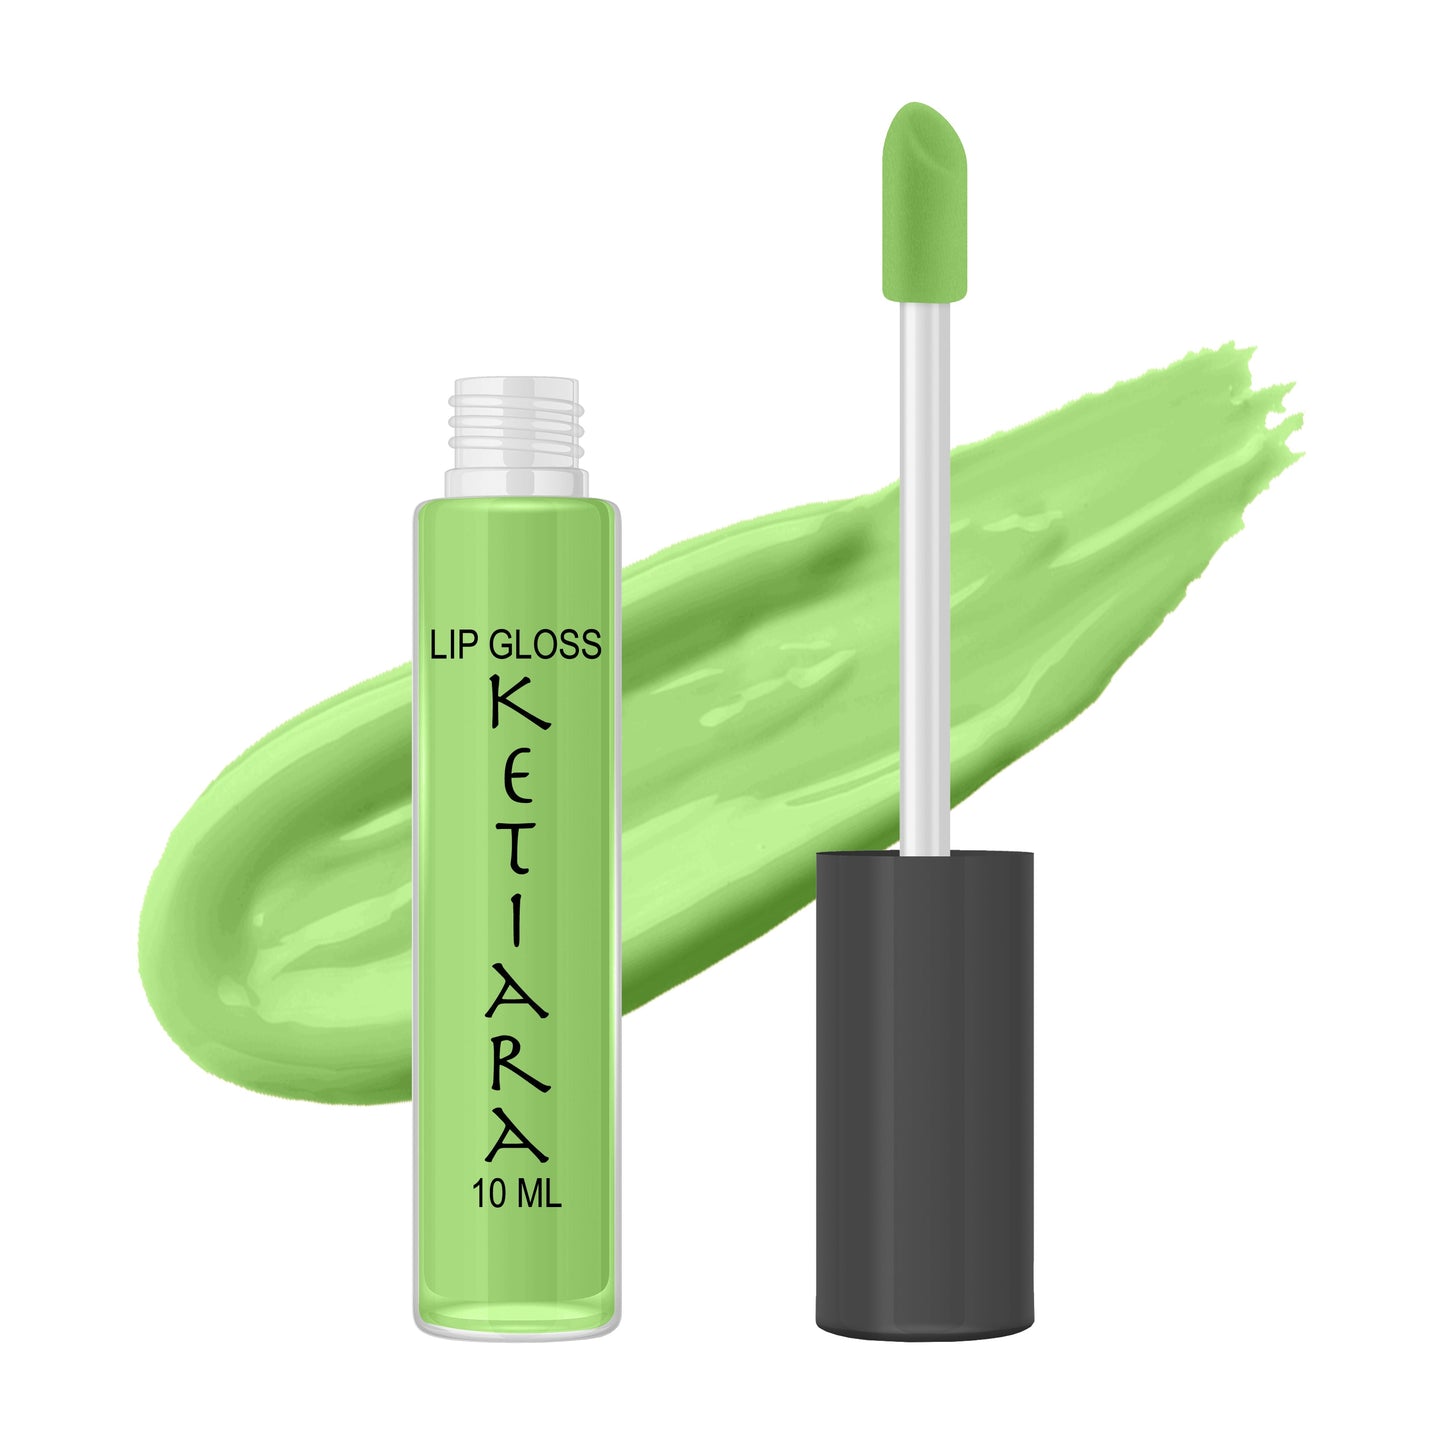 Pistachio Hydrating And Moisturizing Non-sticky Premium Mild Tinting Lip Gloss Infused With Hyaluronic Acid